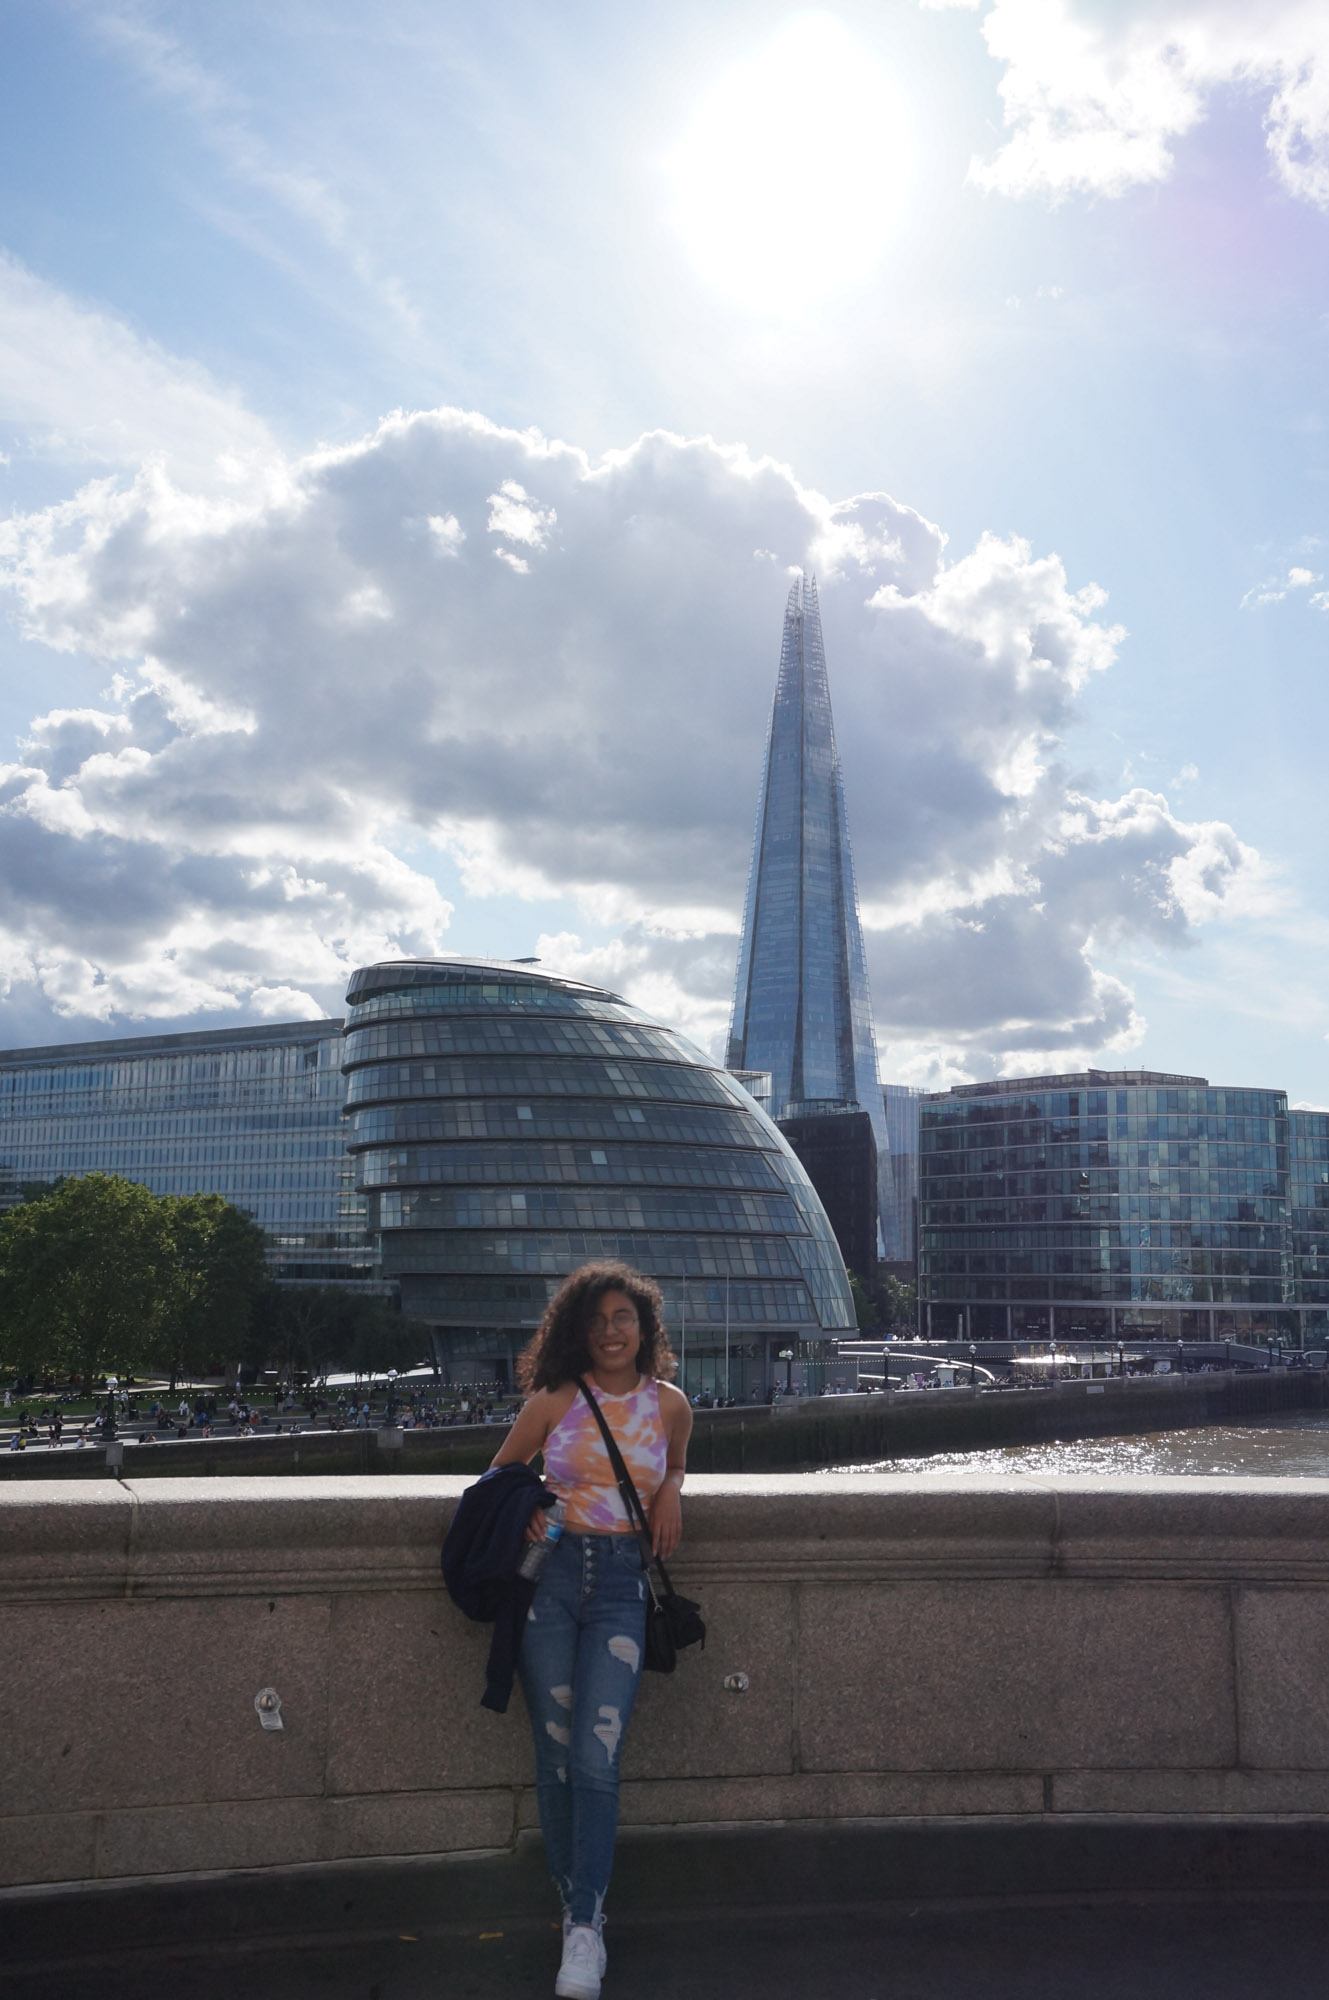 Lesley Gonzalez posing in front of a London skyscraper known as "the Shard."